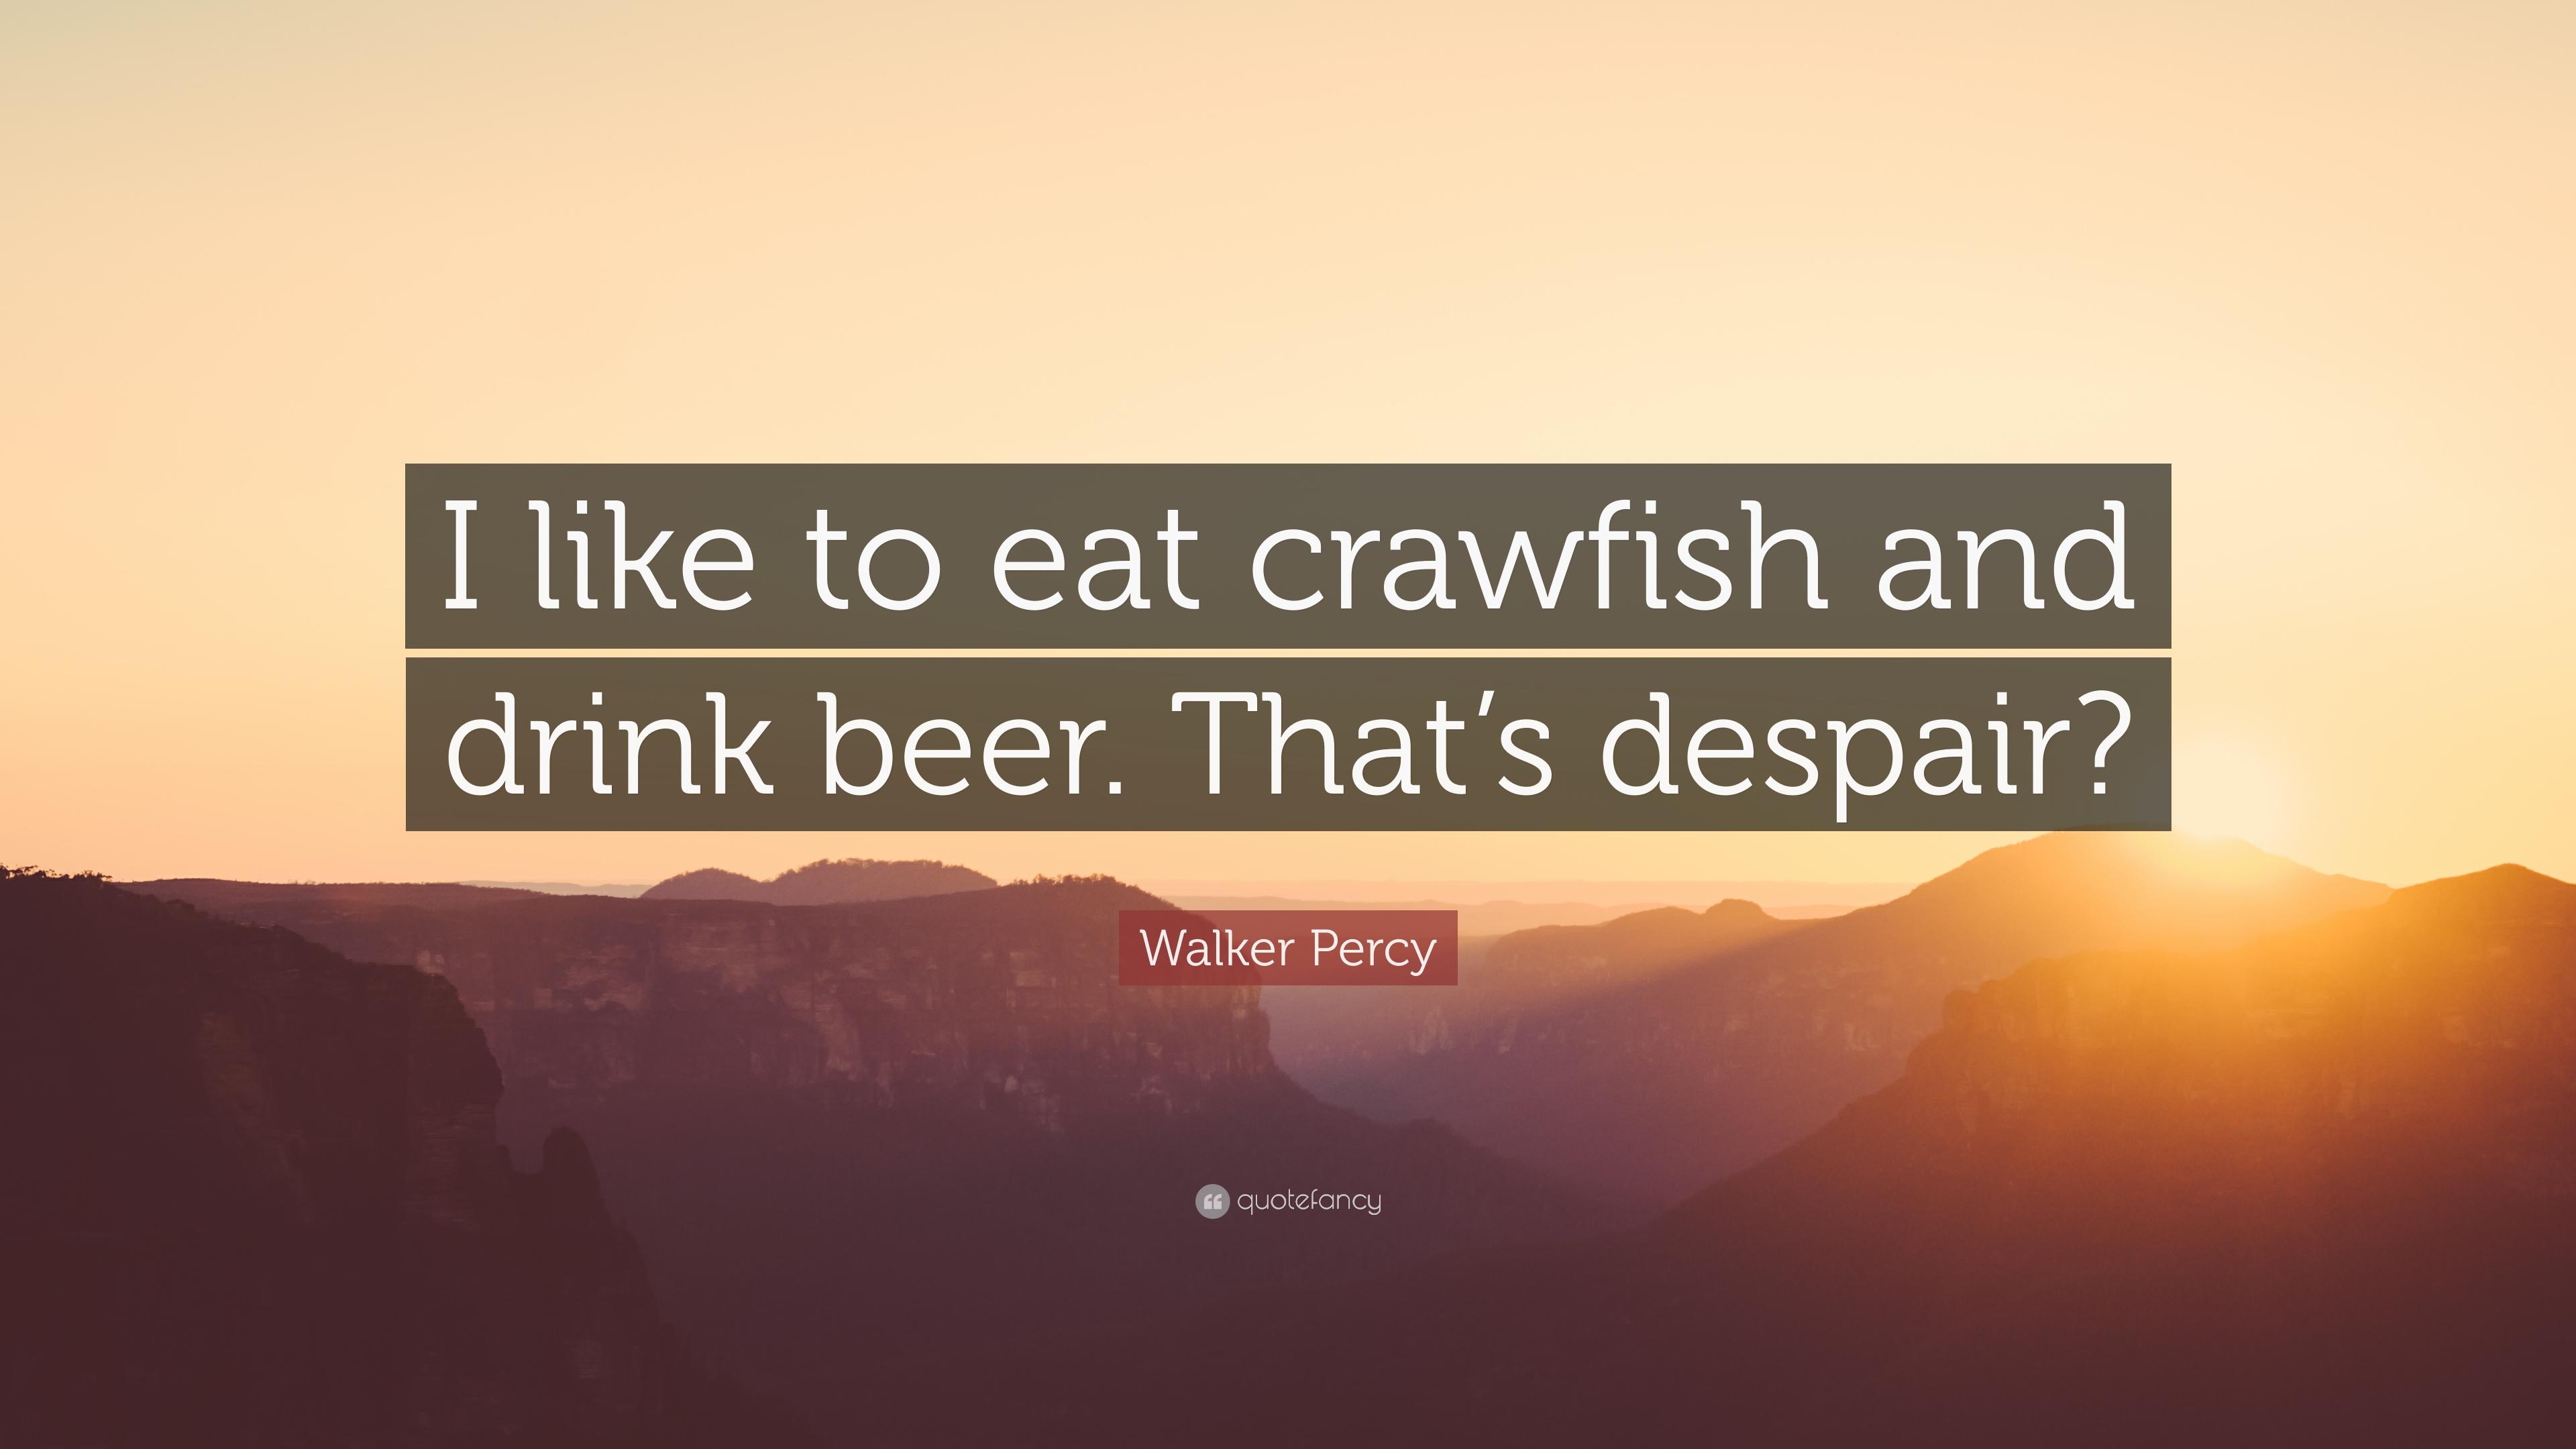 Walker Percy Quote: “I like to eat crawfish and drink beer. That's